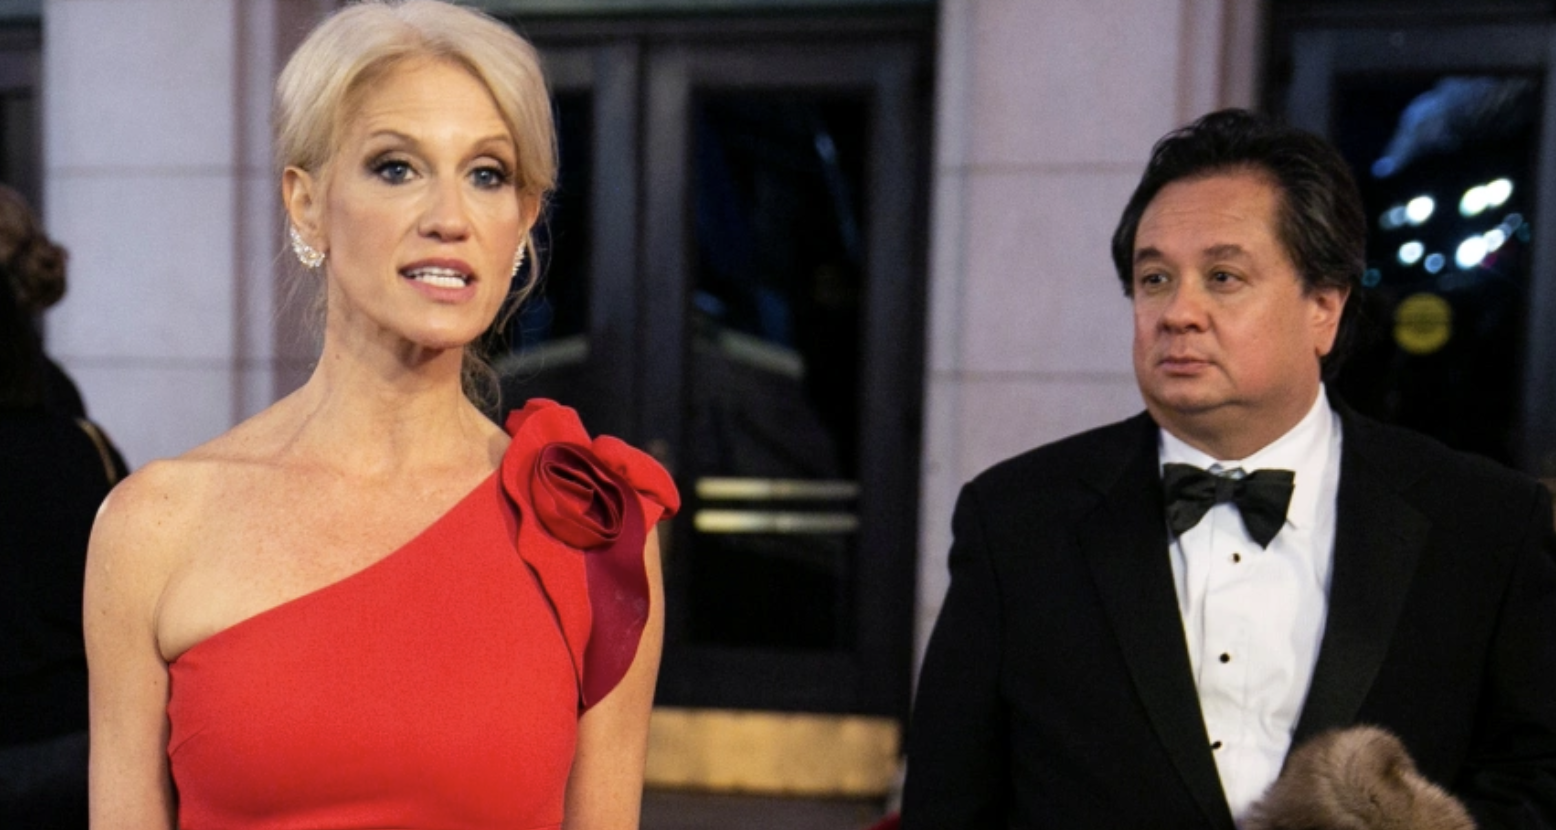 Kellyanne Conway and George Conway to Divorce After 22 Years of Marriage